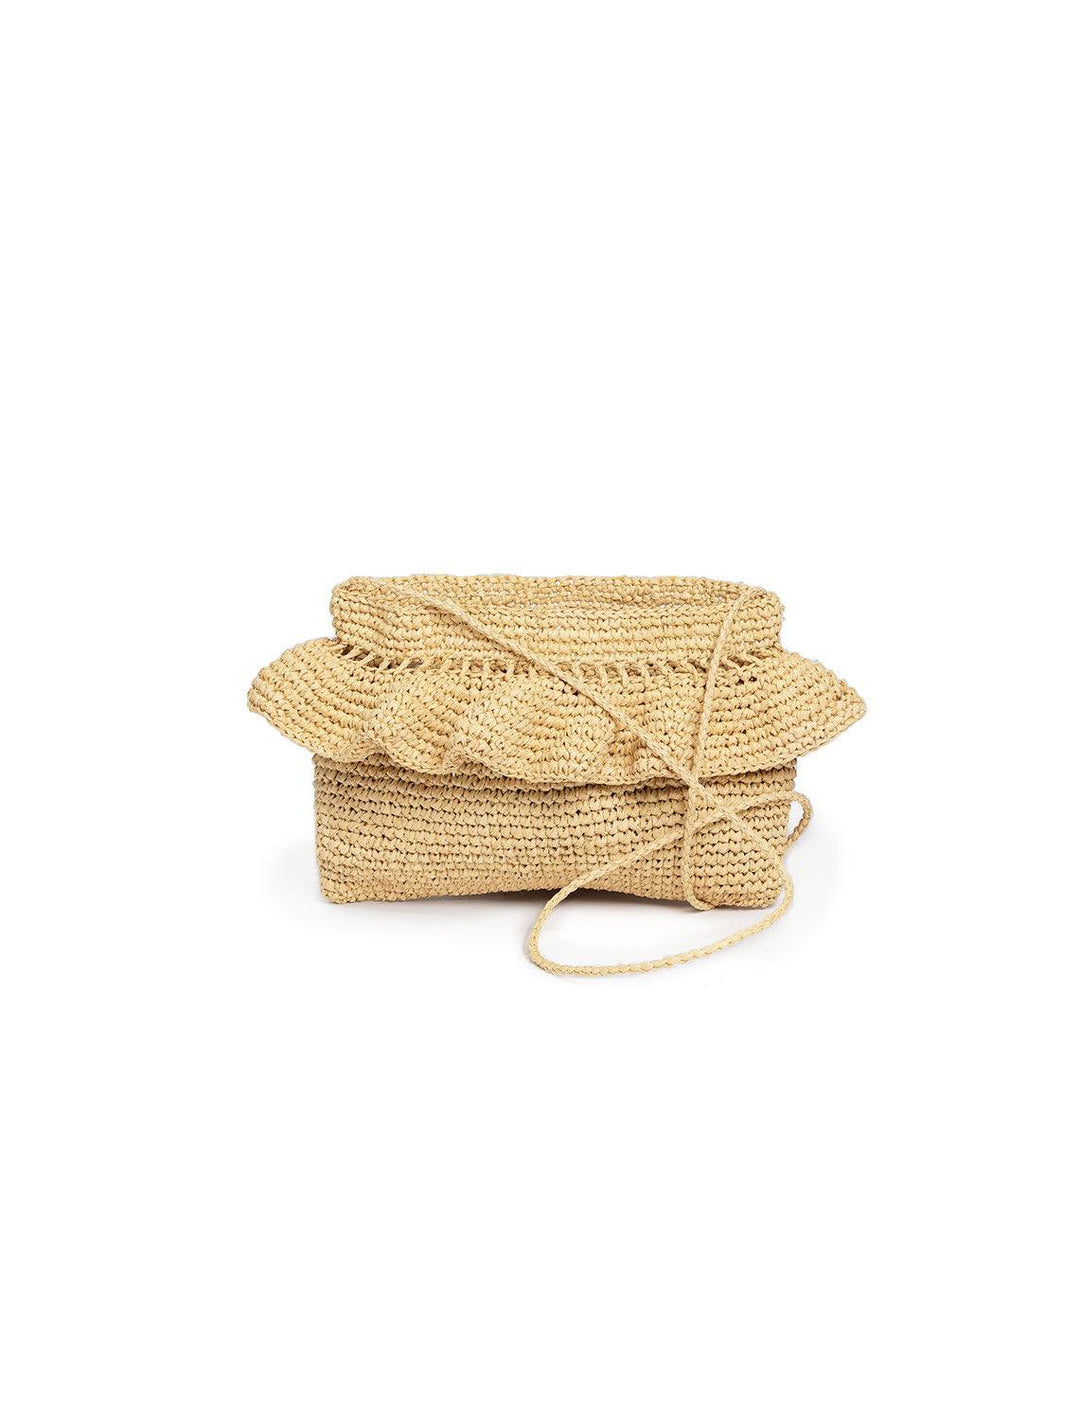 Front view of Hat Attack's ruffle clutch in natural, with strap showing.